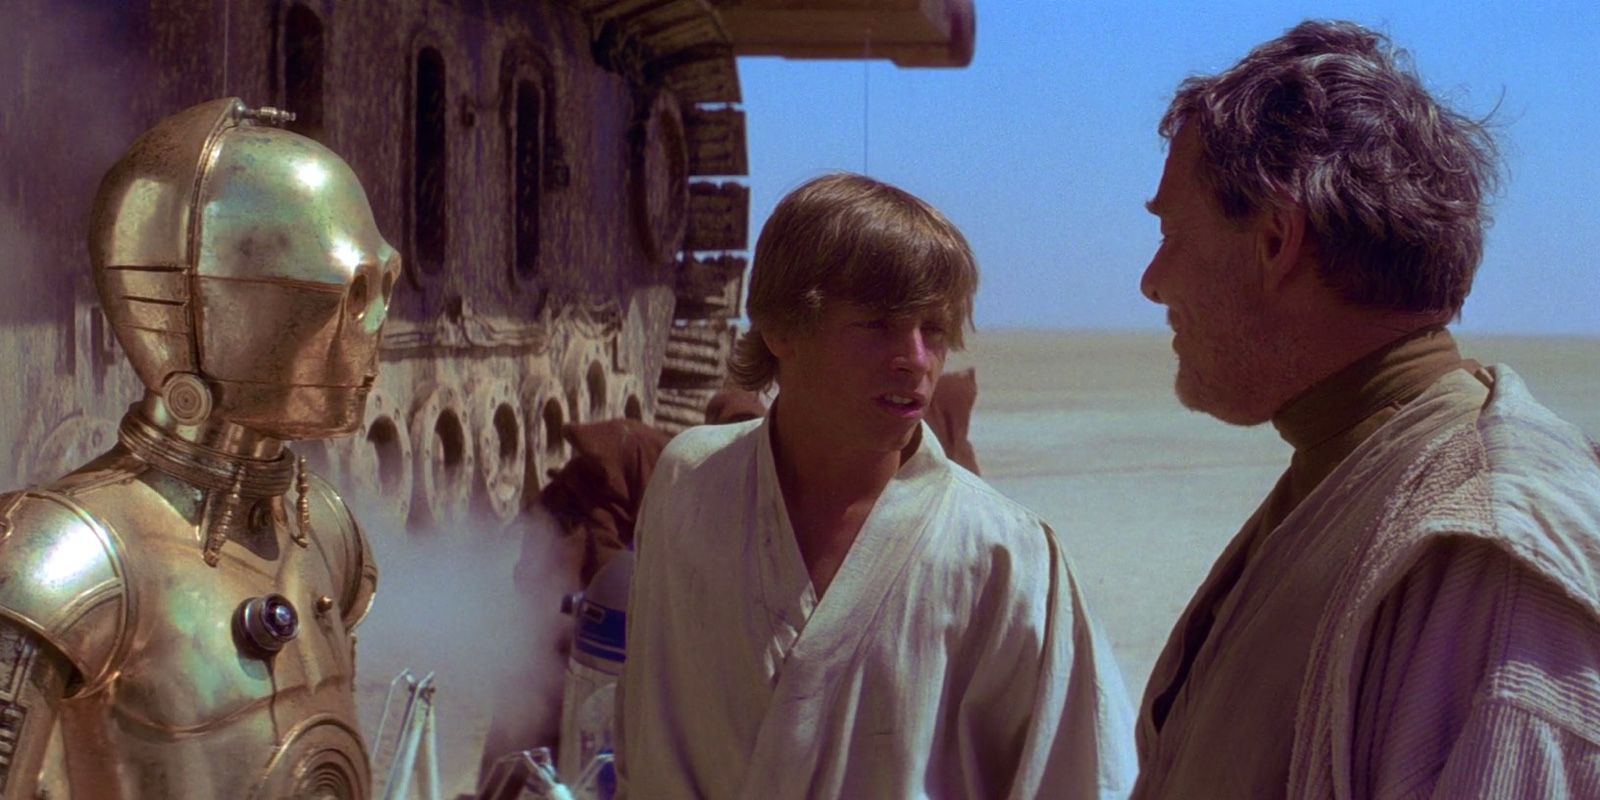 10 Crucial Things About Luke Skywalker You Missed If You Only Watched Star Wars Movies & Shows